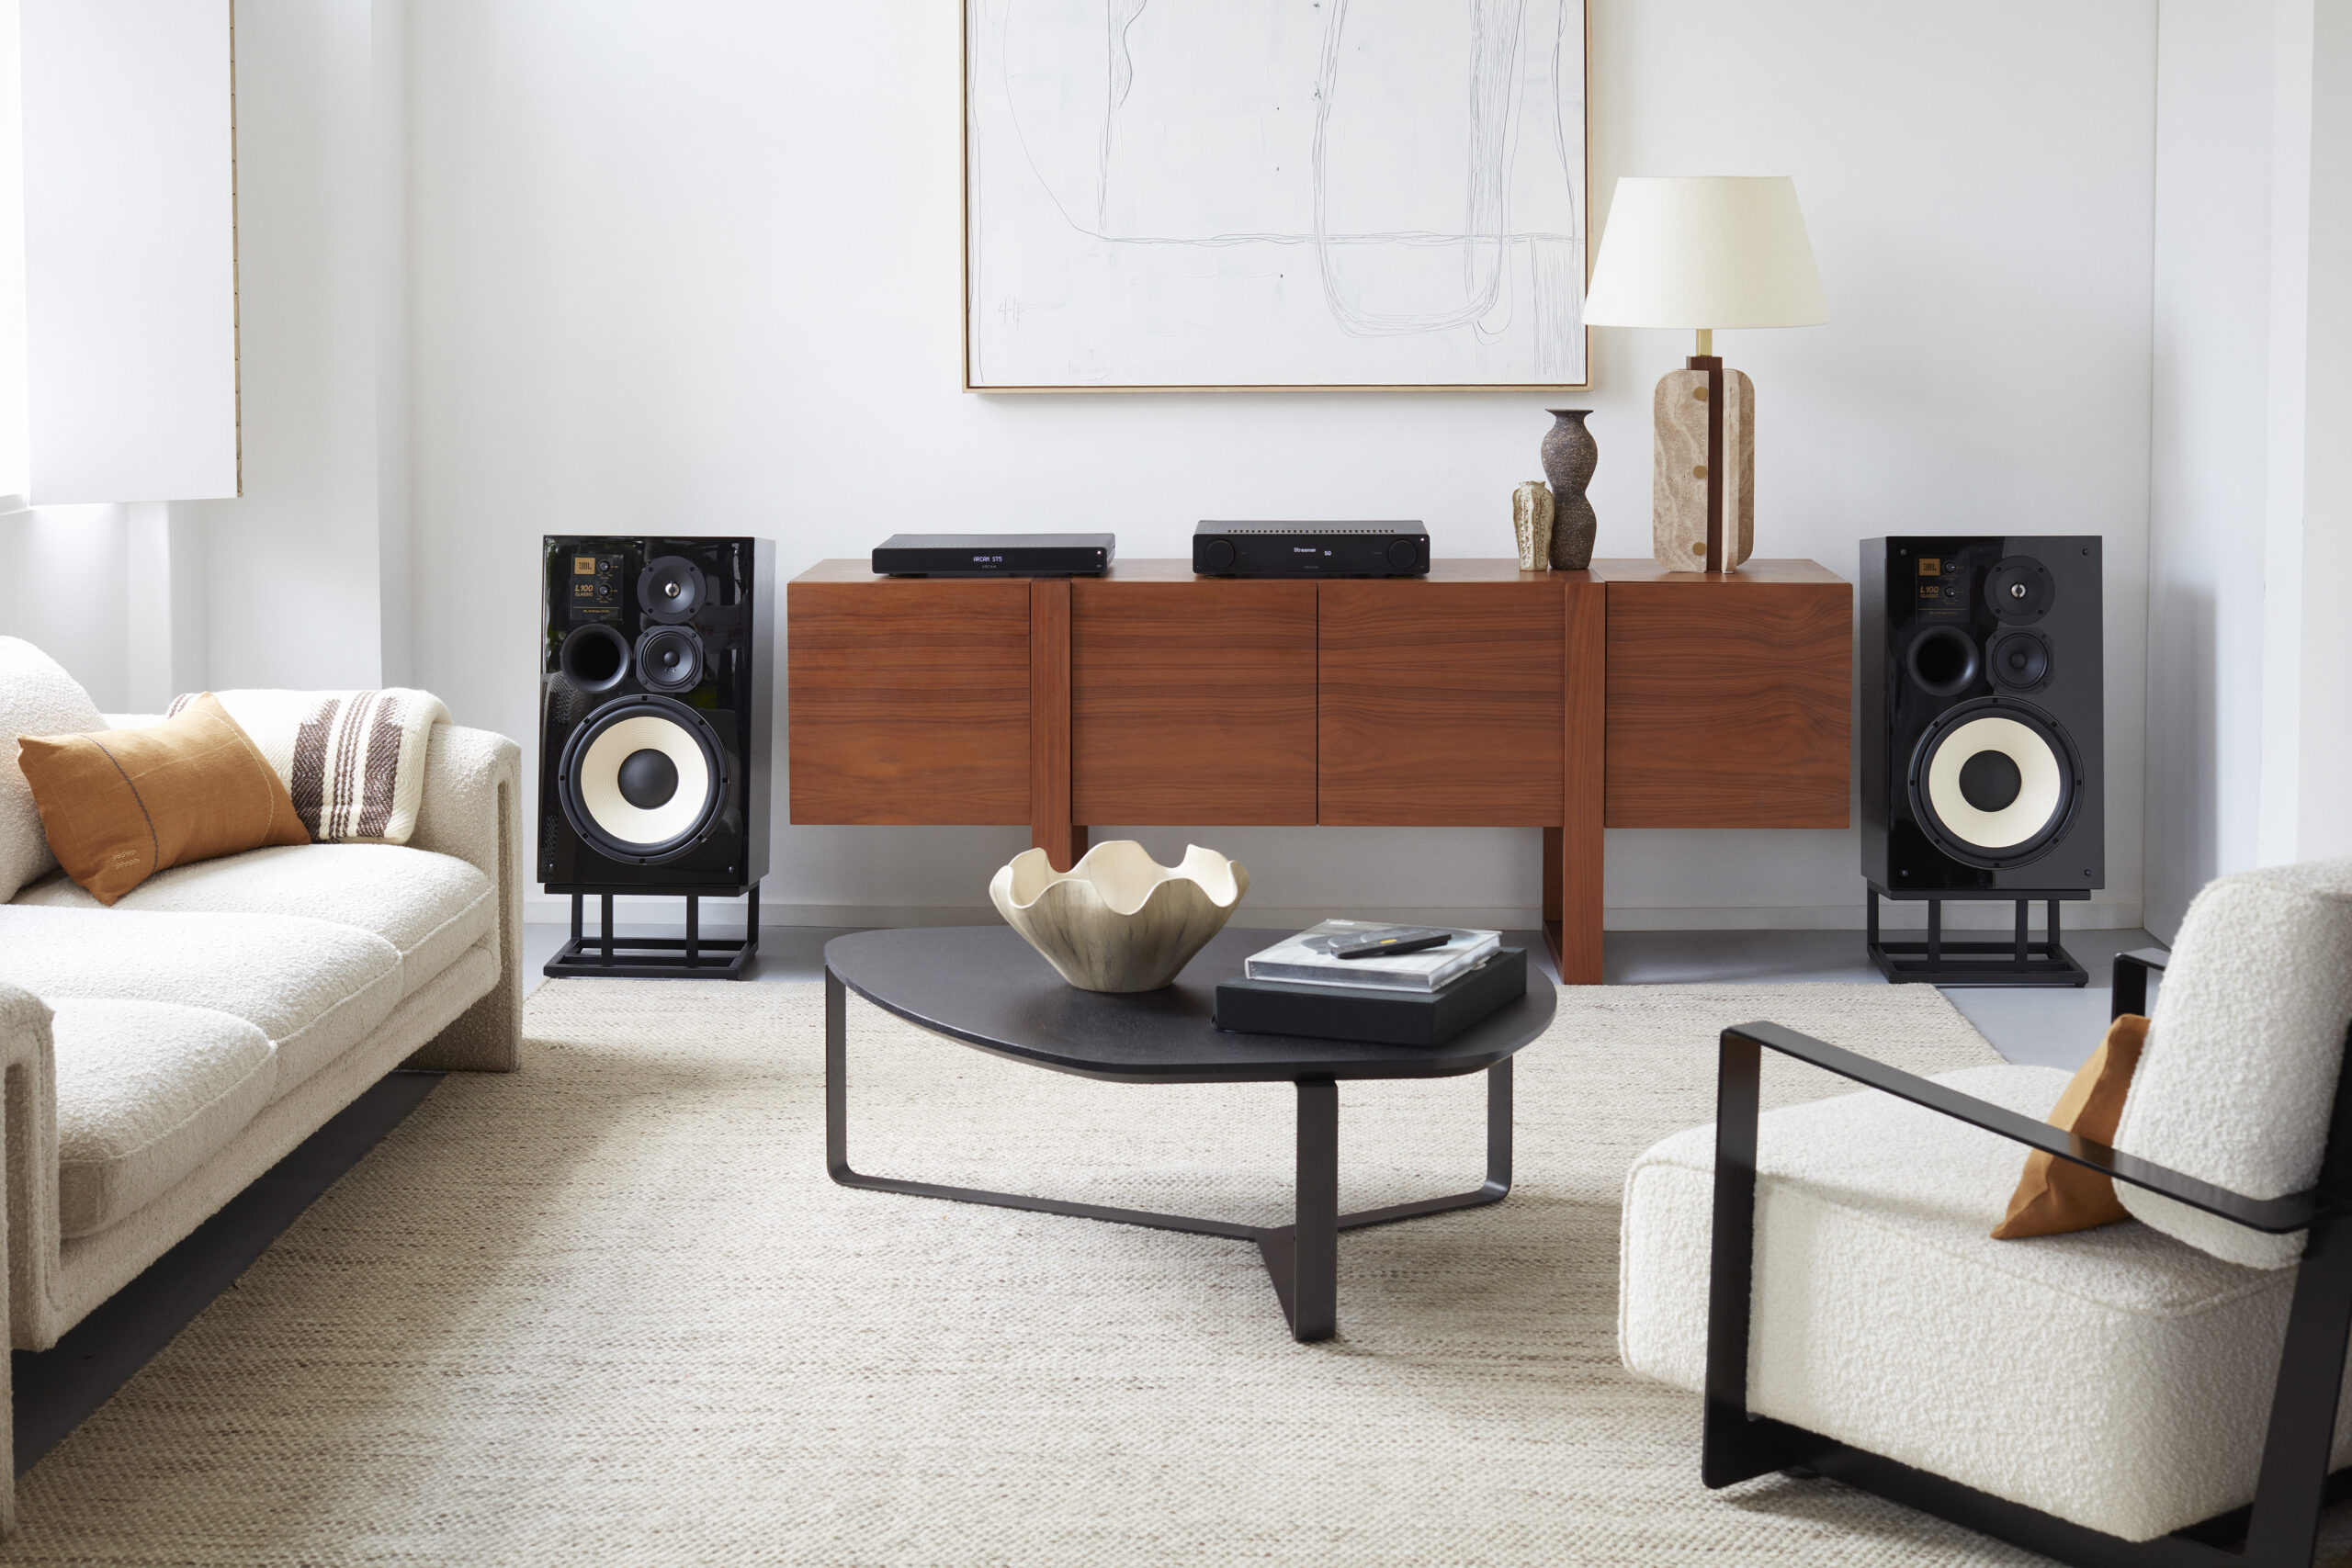 The ARCAM A25 integrated amplifier and ST5 high-resolution streamer on a credenza between JBL L100 speakers